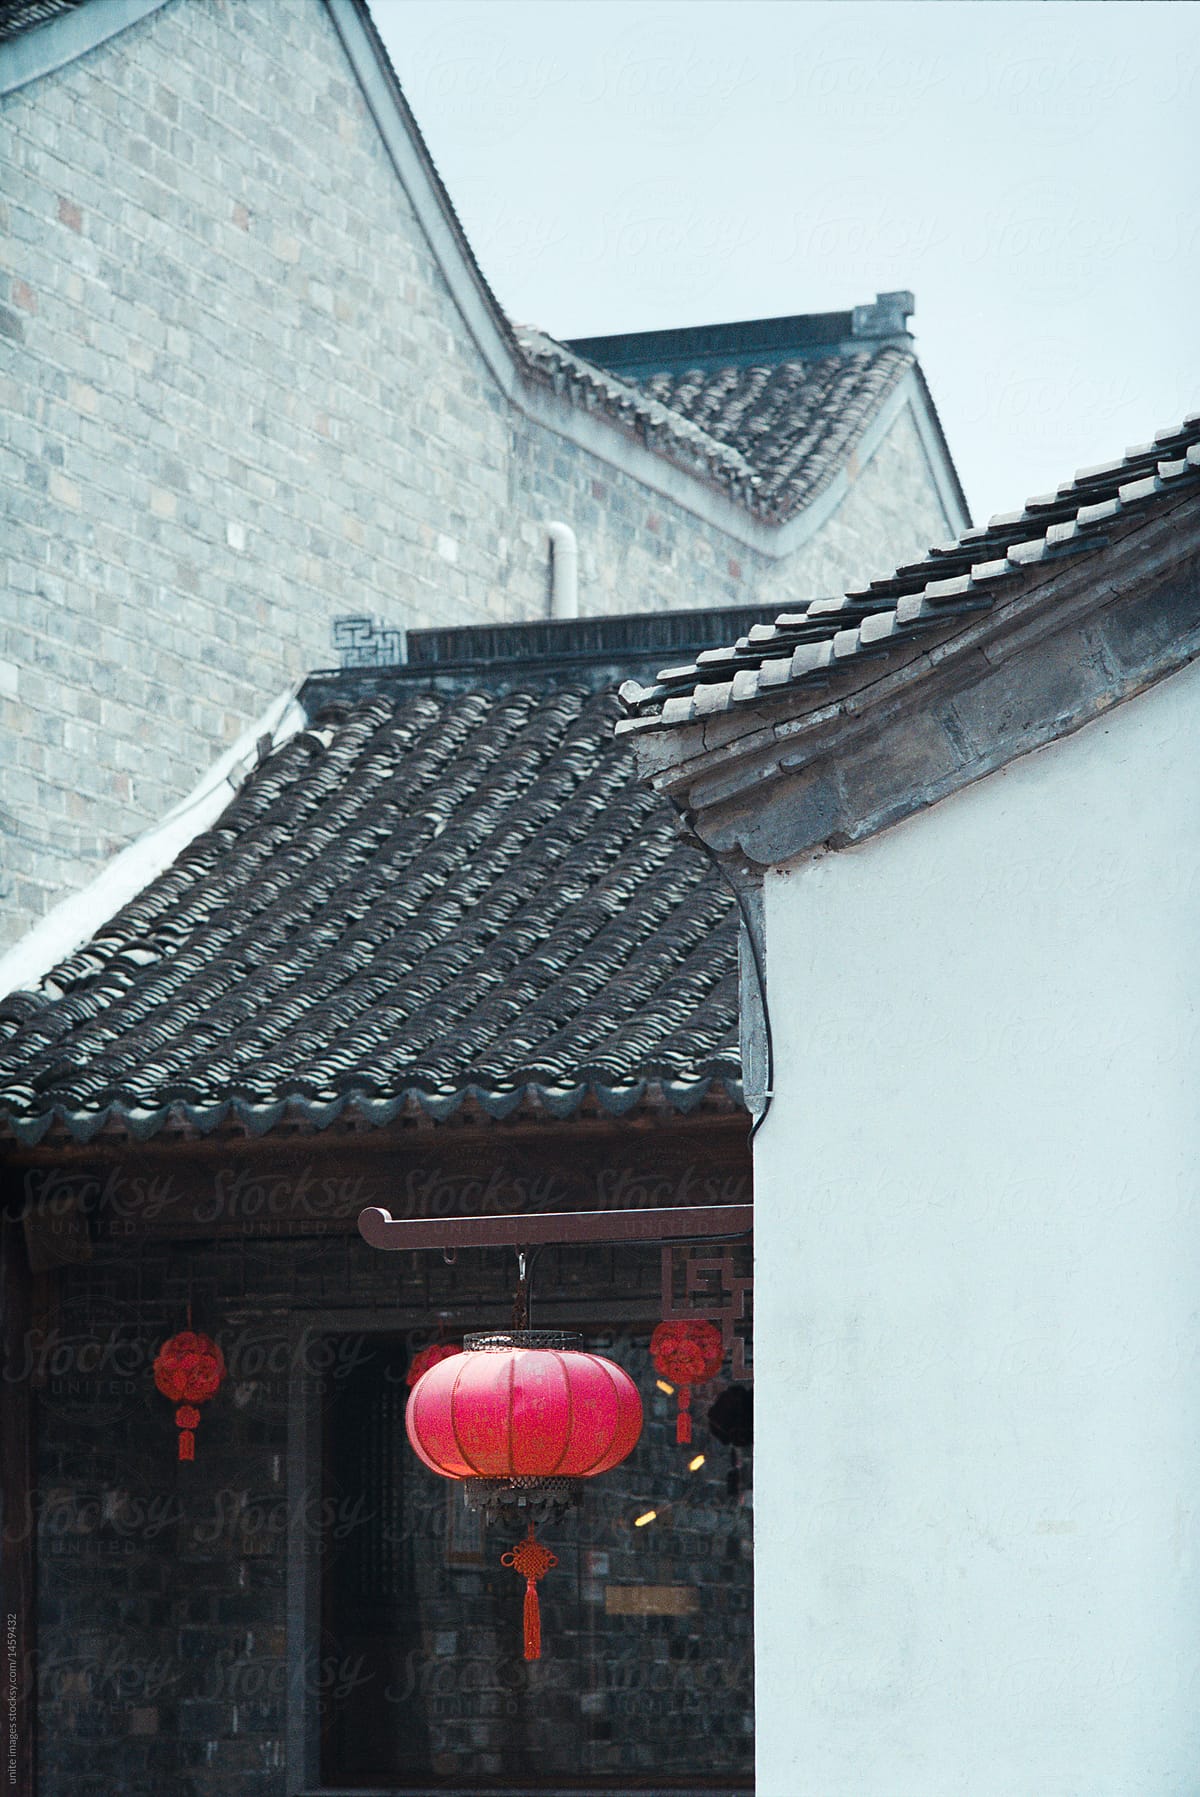 traditional architecture with a red lantern hanging on roof